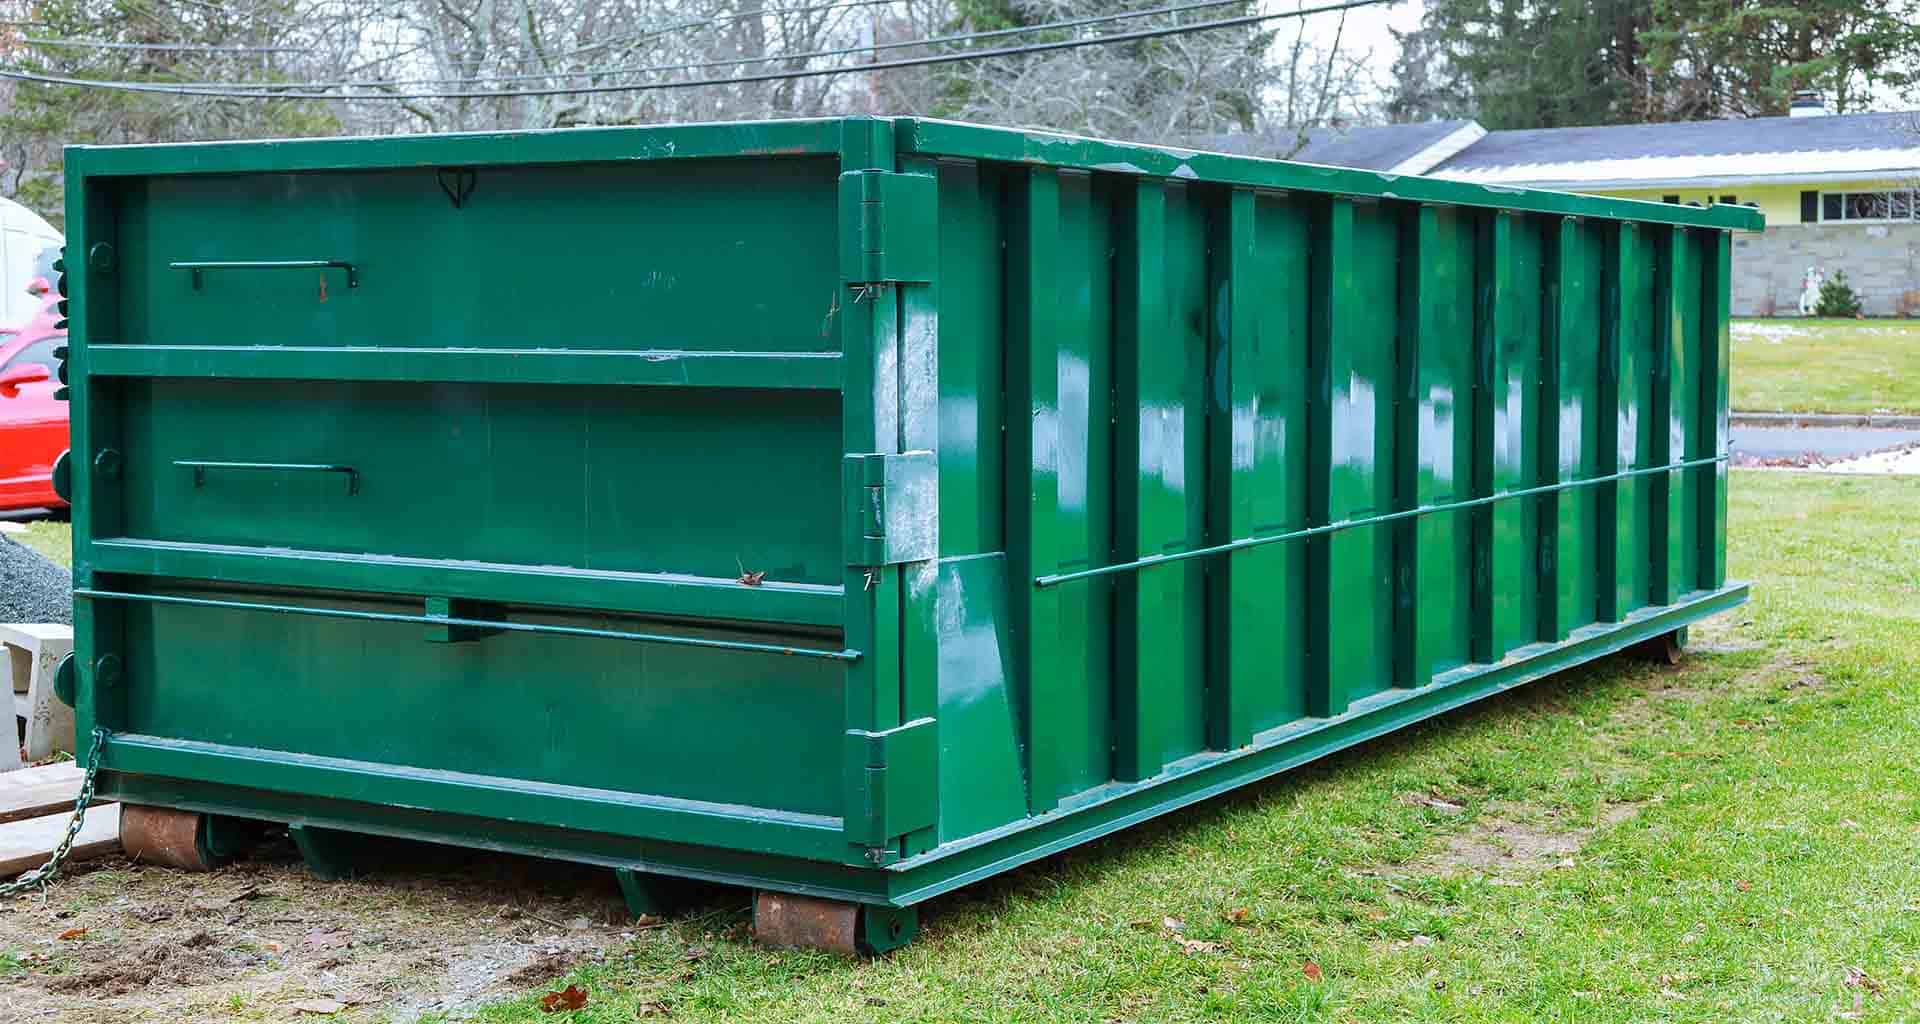 Dumpster Rentals in Upper St Clair PA